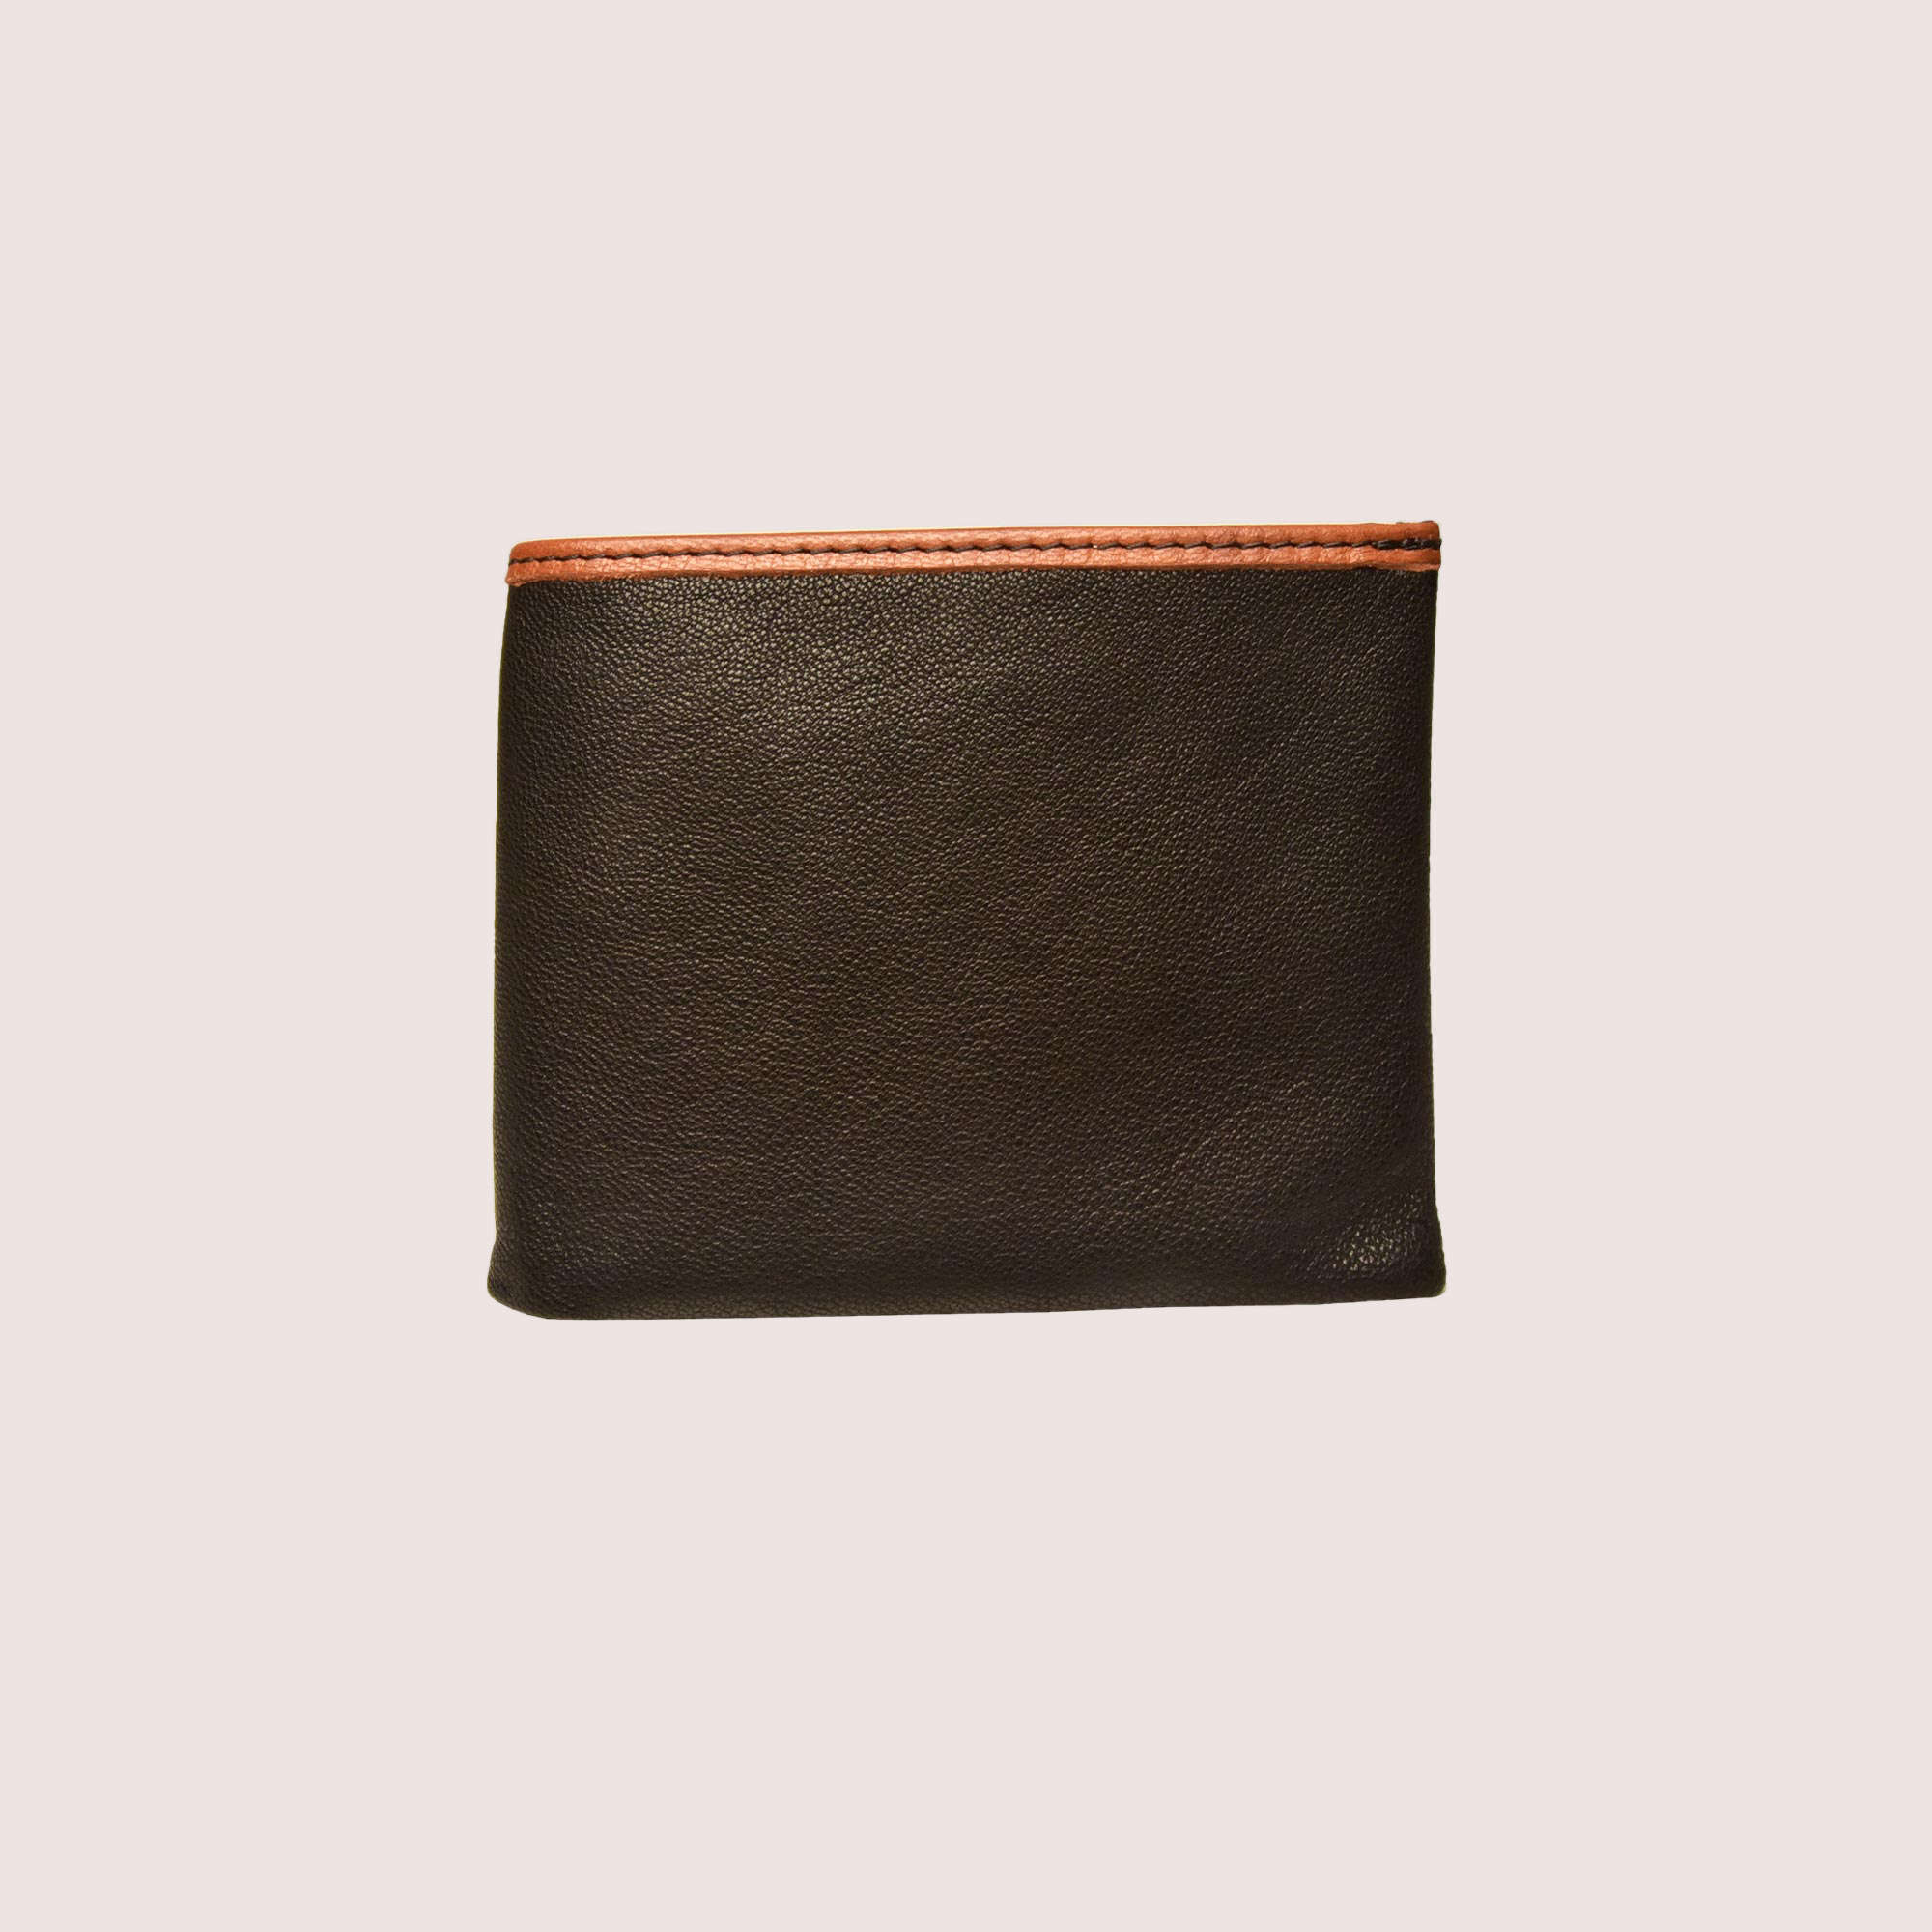 Hinton Hand-Stitched Wallet